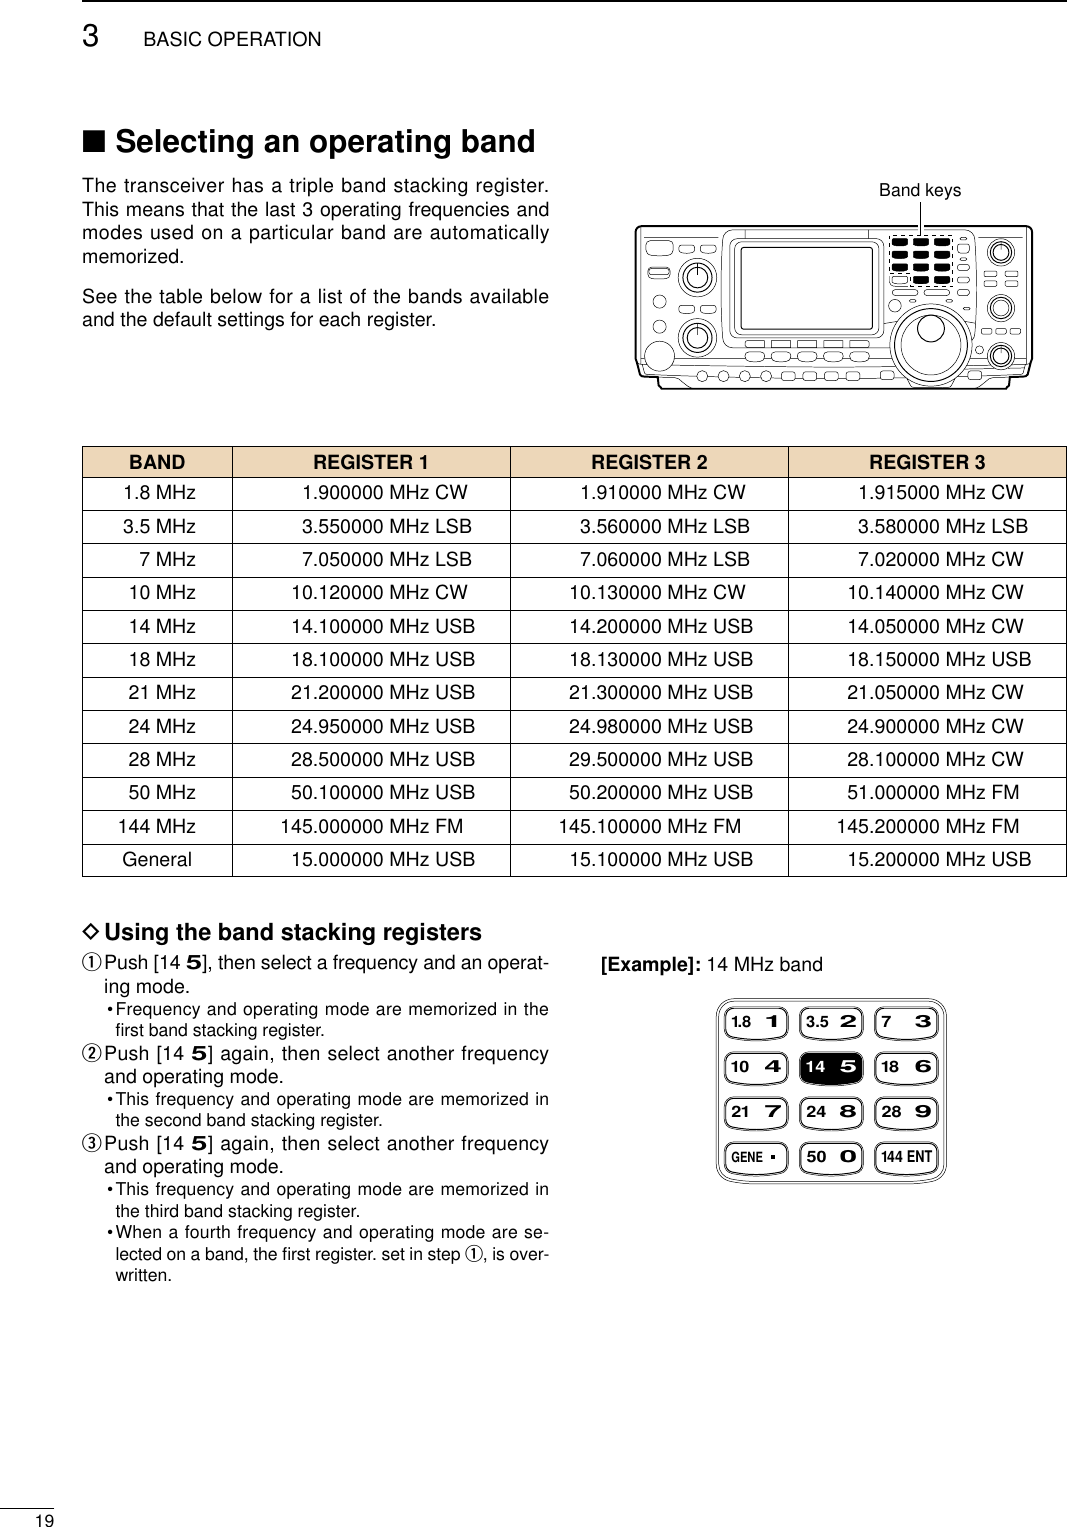 193BASIC OPERATION■Selecting an operating bandThe transceiver has a triple band stacking register.This means that the last 3 operating frequencies andmodes used on a particular band are automaticallymemorized.See the table below for a list of the bands availableand the default settings for each register.DUsing the band stacking registersqPush [14 5], then select a frequency and an operat-ing mode.•Frequency and operating mode are memorized in theﬁrst band stacking register.wPush [14 5] again, then select another frequencyand operating mode.•This frequency and operating mode are memorized inthe second band stacking register.ePush [14 5] again, then select another frequencyand operating mode.•This frequency and operating mode are memorized inthe third band stacking register.•When a fourth frequency and operating mode are se-lected on a band, the ﬁrst register. set in step q, is over-written.Band keysBAND REGISTER 1 REGISTER 2 REGISTER 31.8 MHz 1.900000 MHz CW 1.910000 MHz CW 1.915000 MHz CW3.5 MHz 3.550000 MHz LSB 3.560000 MHz LSB 3.580000 MHz LSB7 MHz 7.050000 MHz LSB 7.060000 MHz LSB 7.020000 MHz CW10 MHz 10.120000 MHz CW 10.130000 MHz CW 10.140000 MHz CW14 MHz 14.100000 MHz USB 14.200000 MHz USB 14.050000 MHz CW18 MHz 18.100000 MHz USB 18.130000 MHz USB 18.150000 MHz USB21 MHz 21.200000 MHz USB 21.300000 MHz USB 21.050000 MHz CW24 MHz 24.950000 MHz USB 24.980000 MHz USB 24.900000 MHz CW28 MHz 28.500000 MHz USB 29.500000 MHz USB 28.100000 MHz CW50 MHz 50.100000 MHz USB 50.200000 MHz USB 51.000000 MHz FM144 MHz 145.000000 MHz FM 145.100000 MHz FM 145.200000 MHz FMGeneral 15.000000 MHz USB 15.100000 MHz USB 15.200000 MHz USB[Example]: 14 MHz bandGENE5002172482891451041863.521.8173144ENT